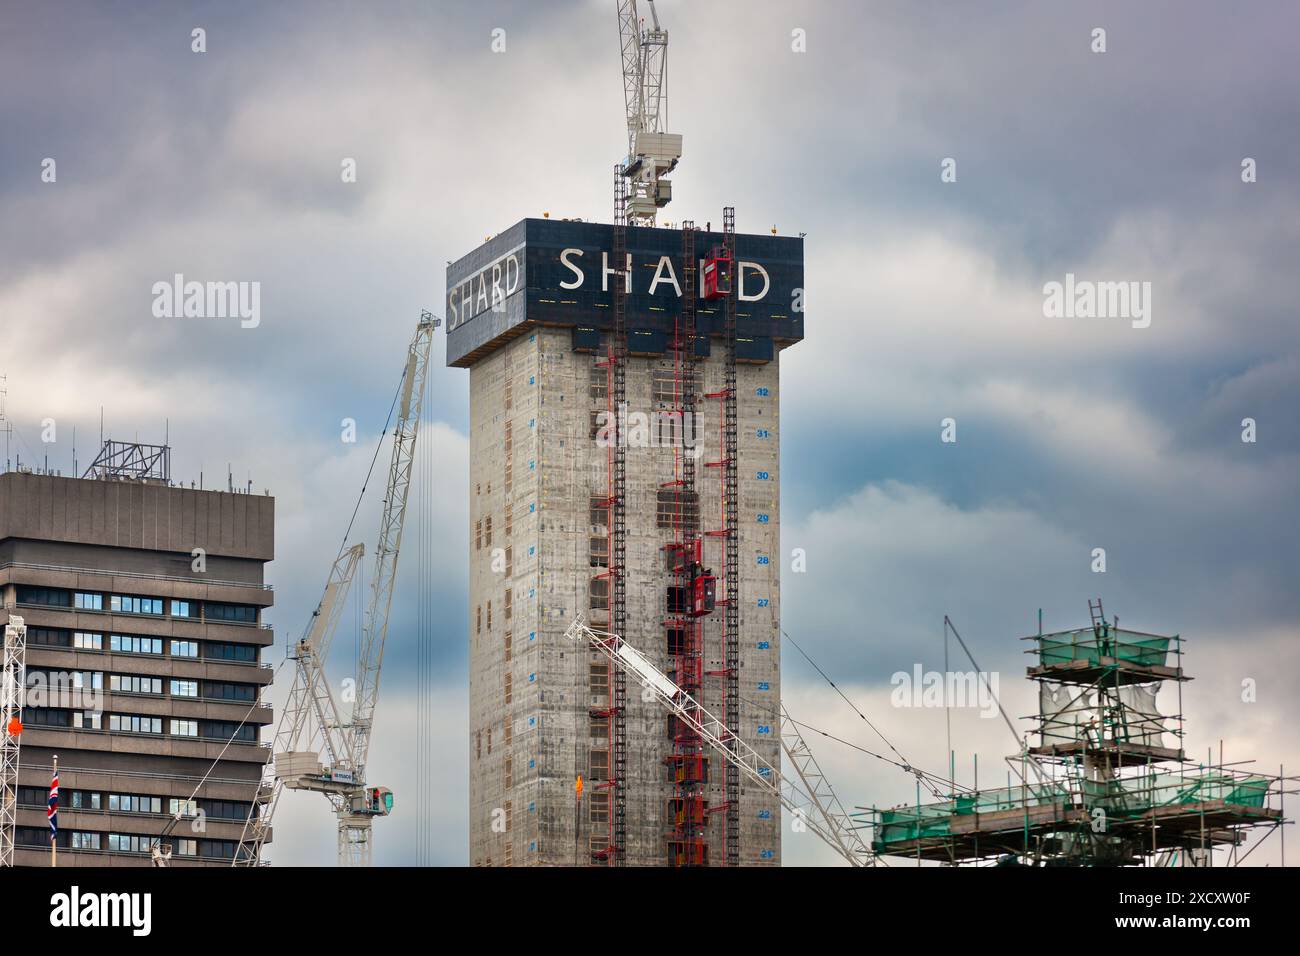 London, United Kingdom - July 2, 2010 : Building of The Shard. Construction of the future 87 floor skyscraper on south side River Thames. Stock Photo